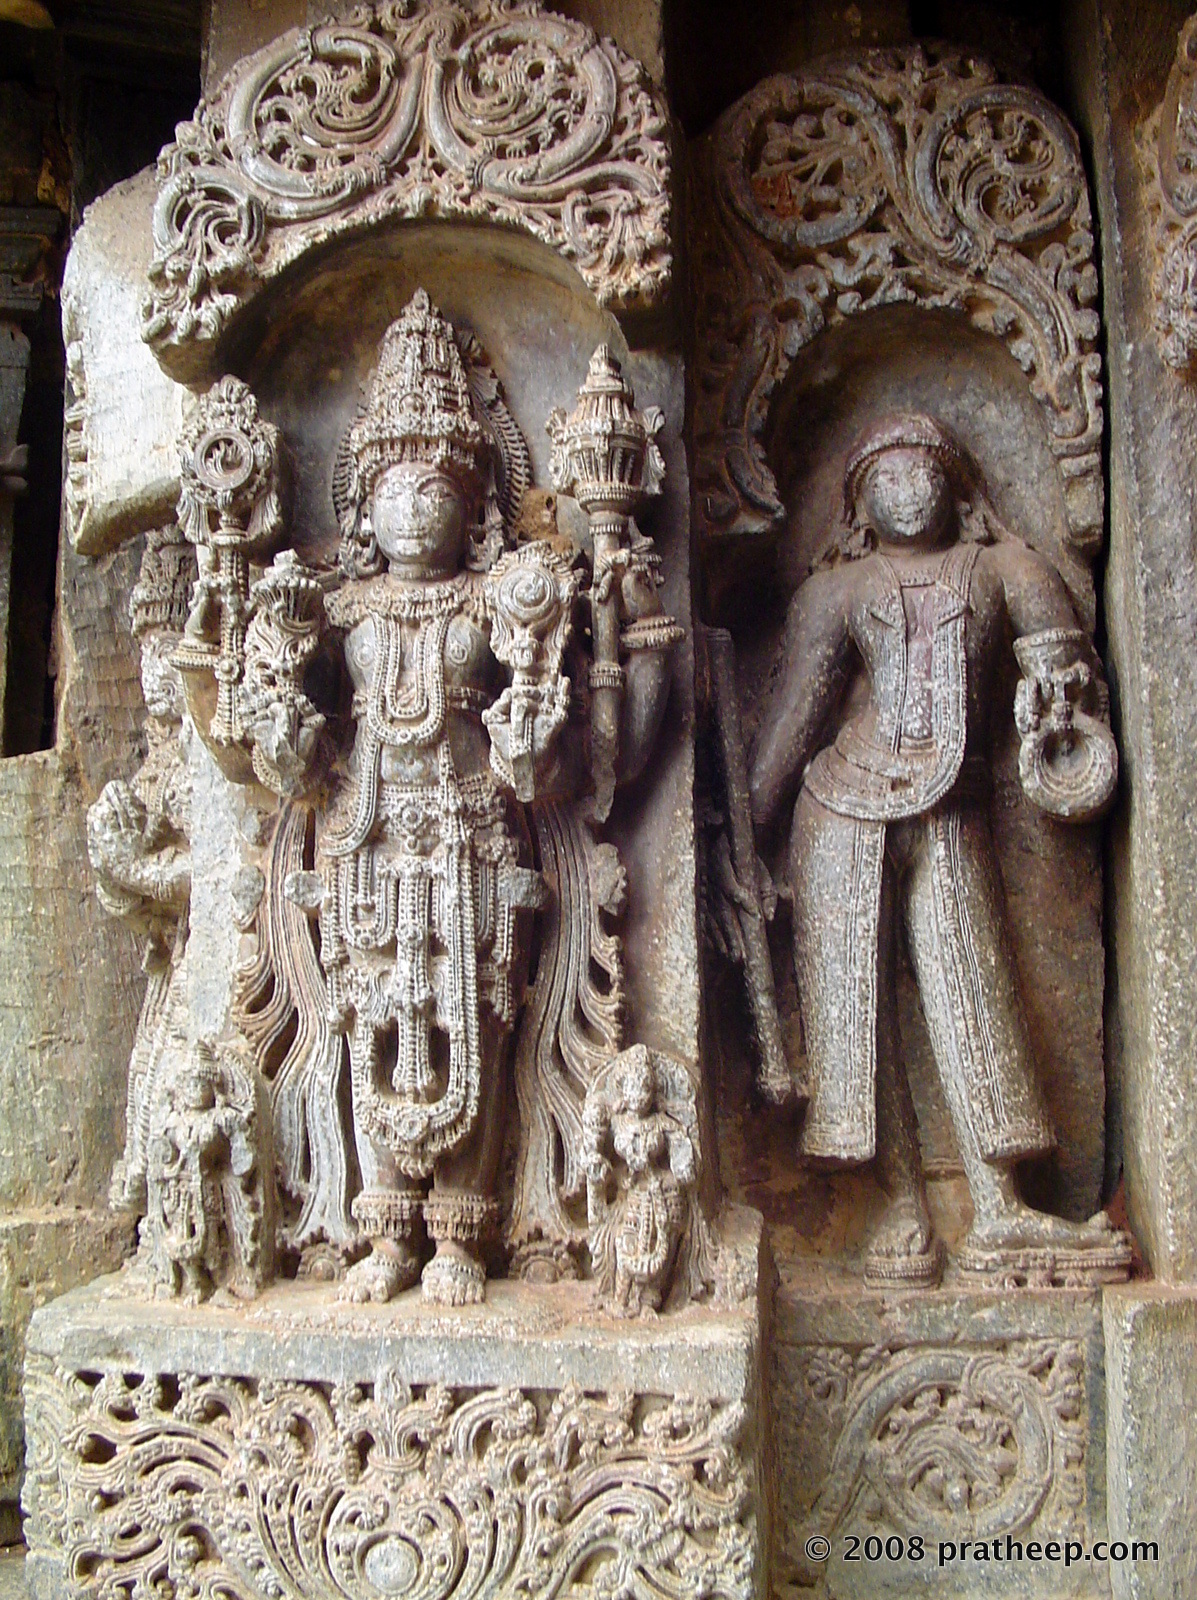 I've seen such image in a few other Hoysala period temples. Not sure what was the circumstance to include a western costumed theme, among the otherwise traditional themes. 